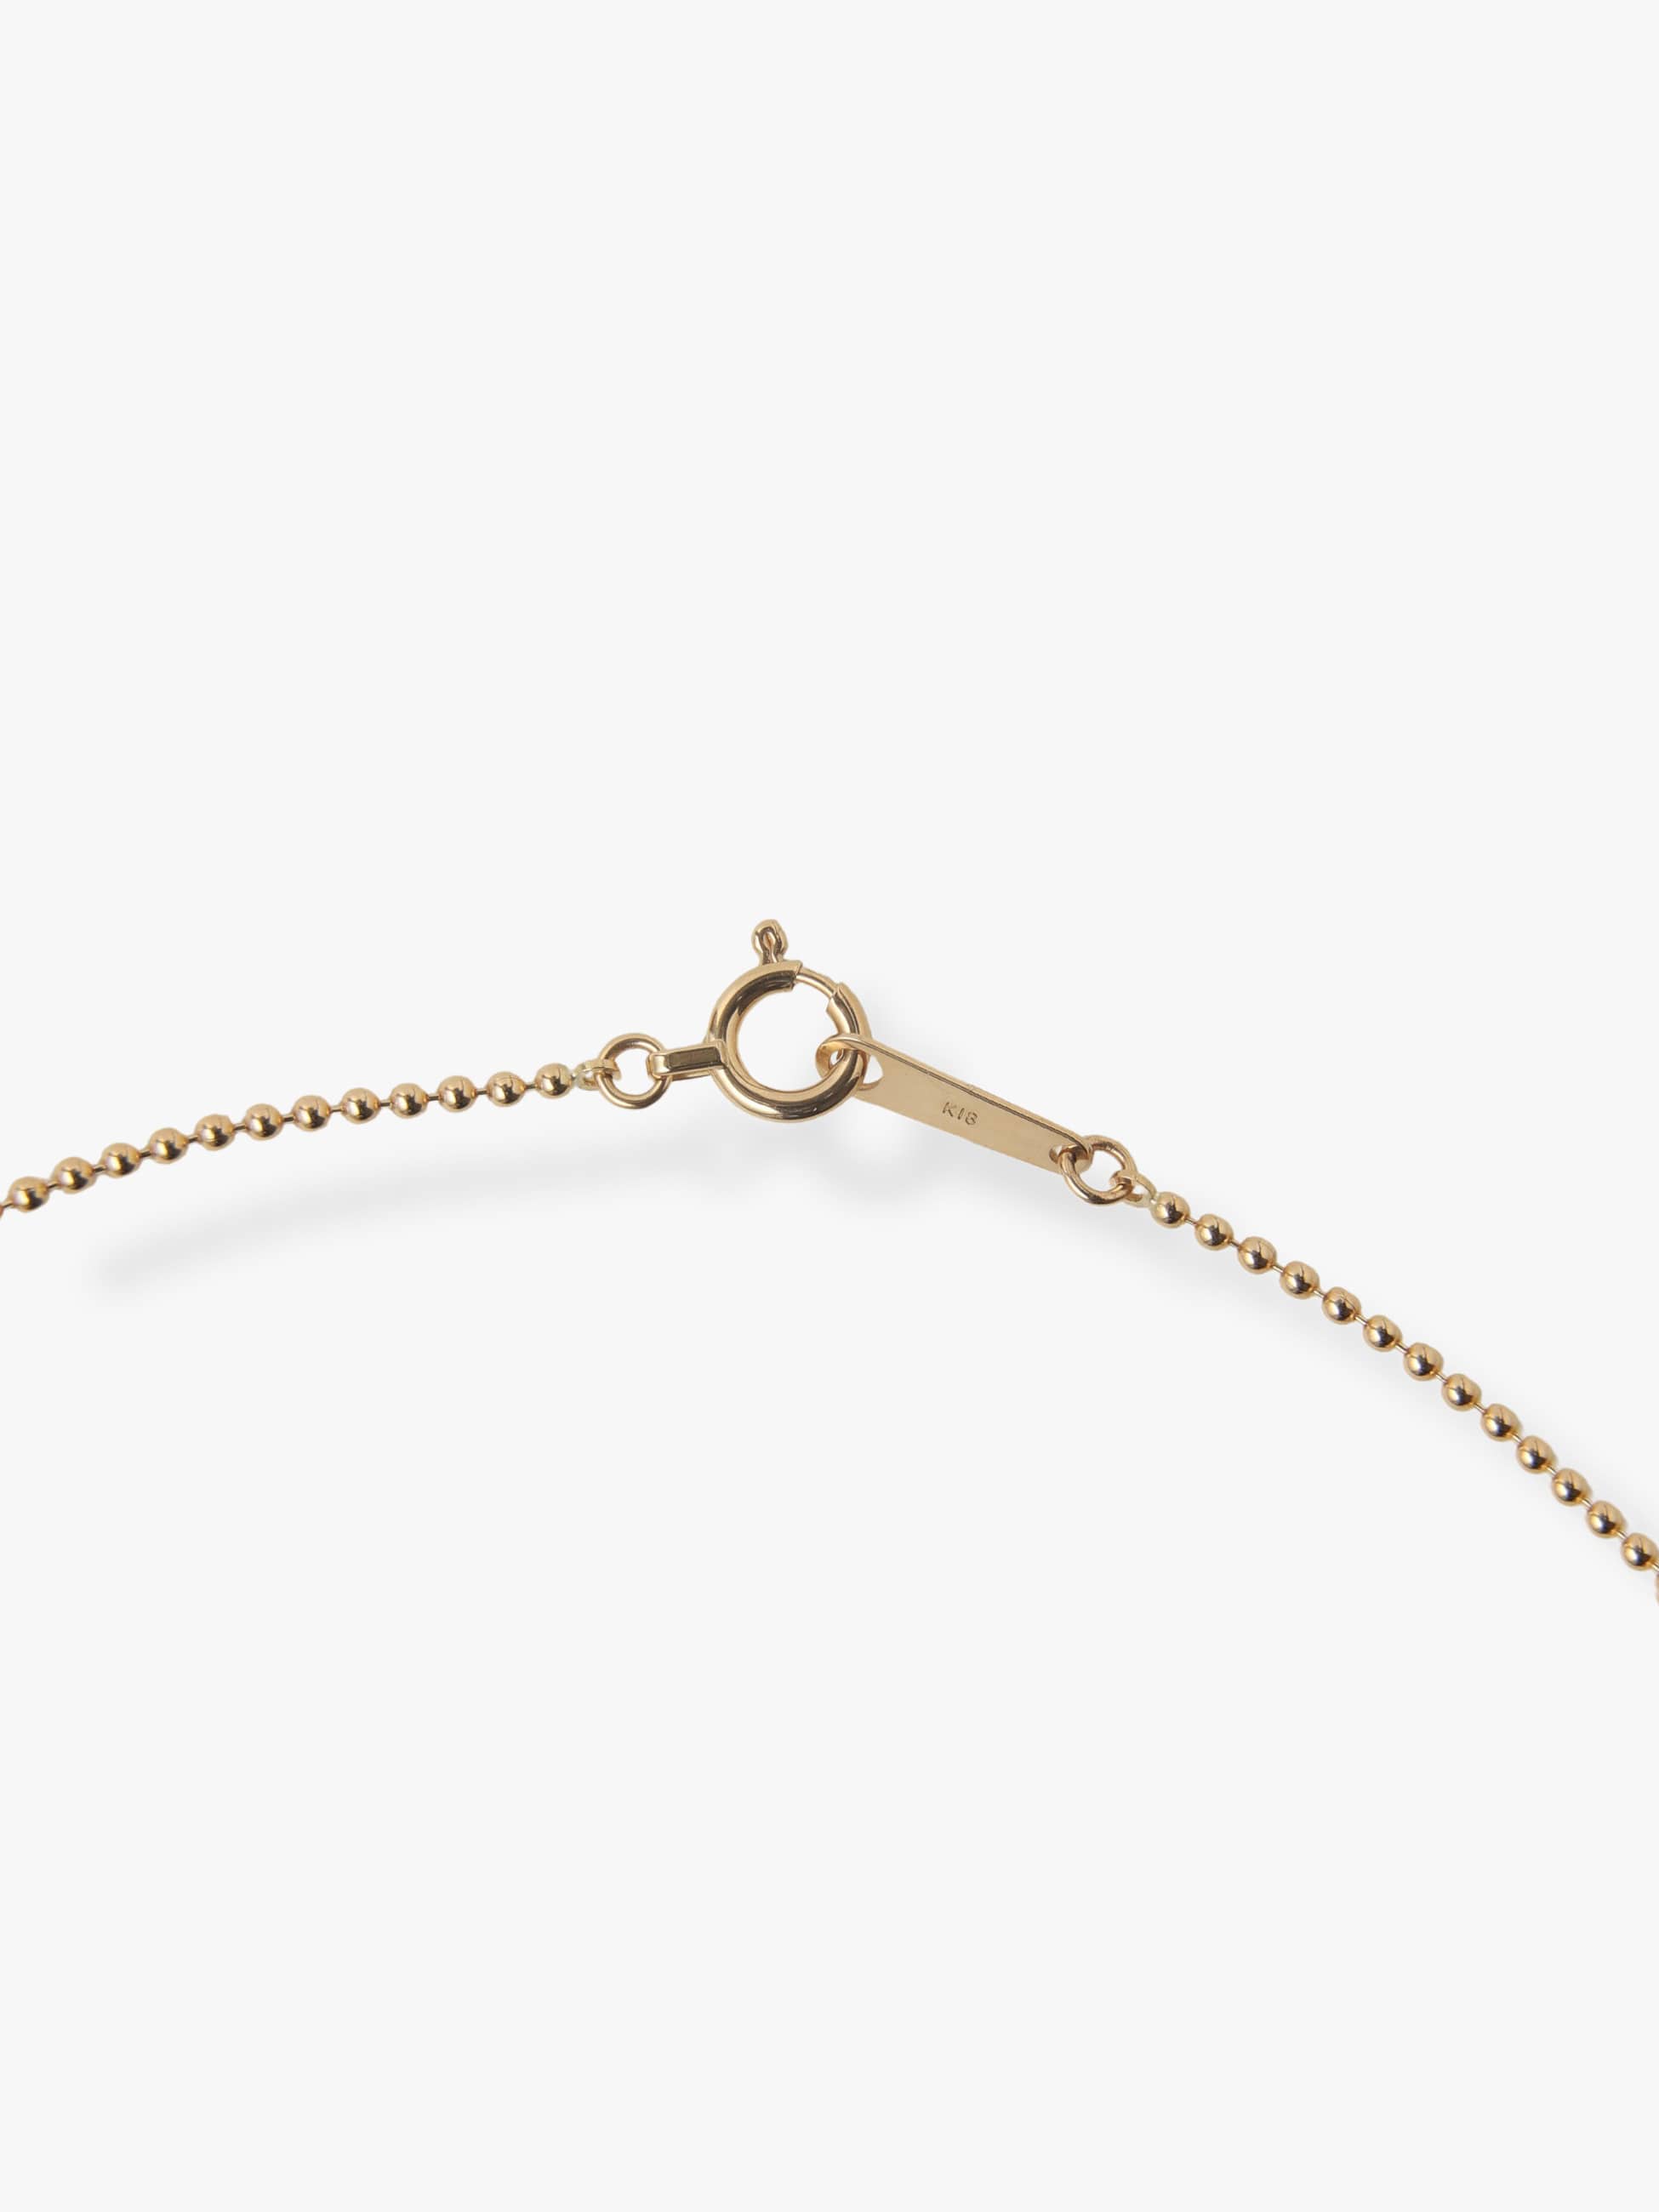 Small Gold Ball Chain Necklace（Women） 詳細画像 yellow gold 2